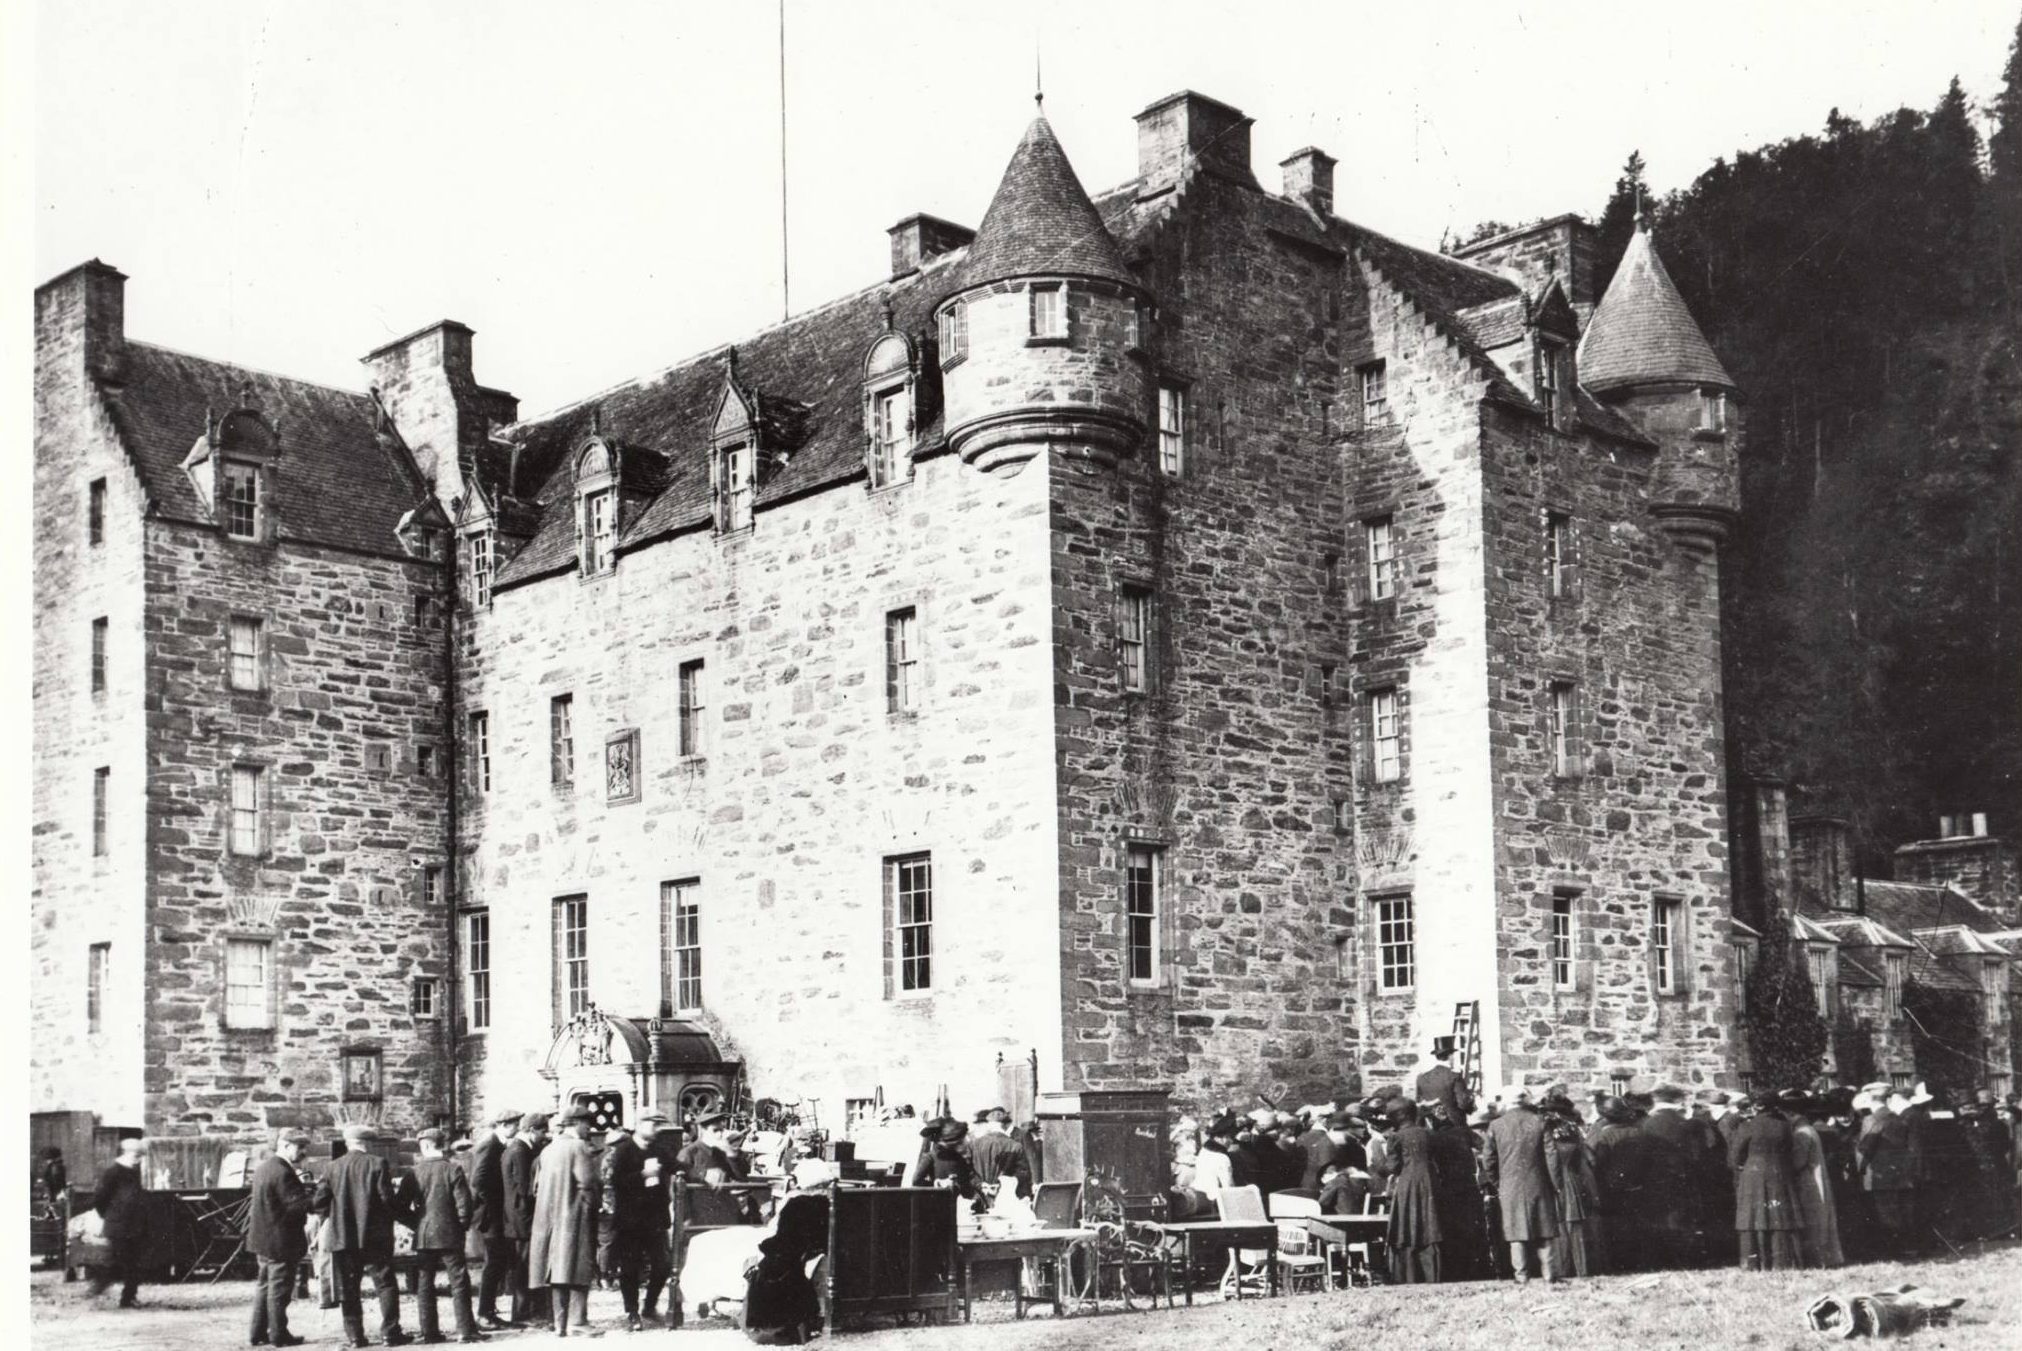 Auction of Castle Menzies, early 1900s.